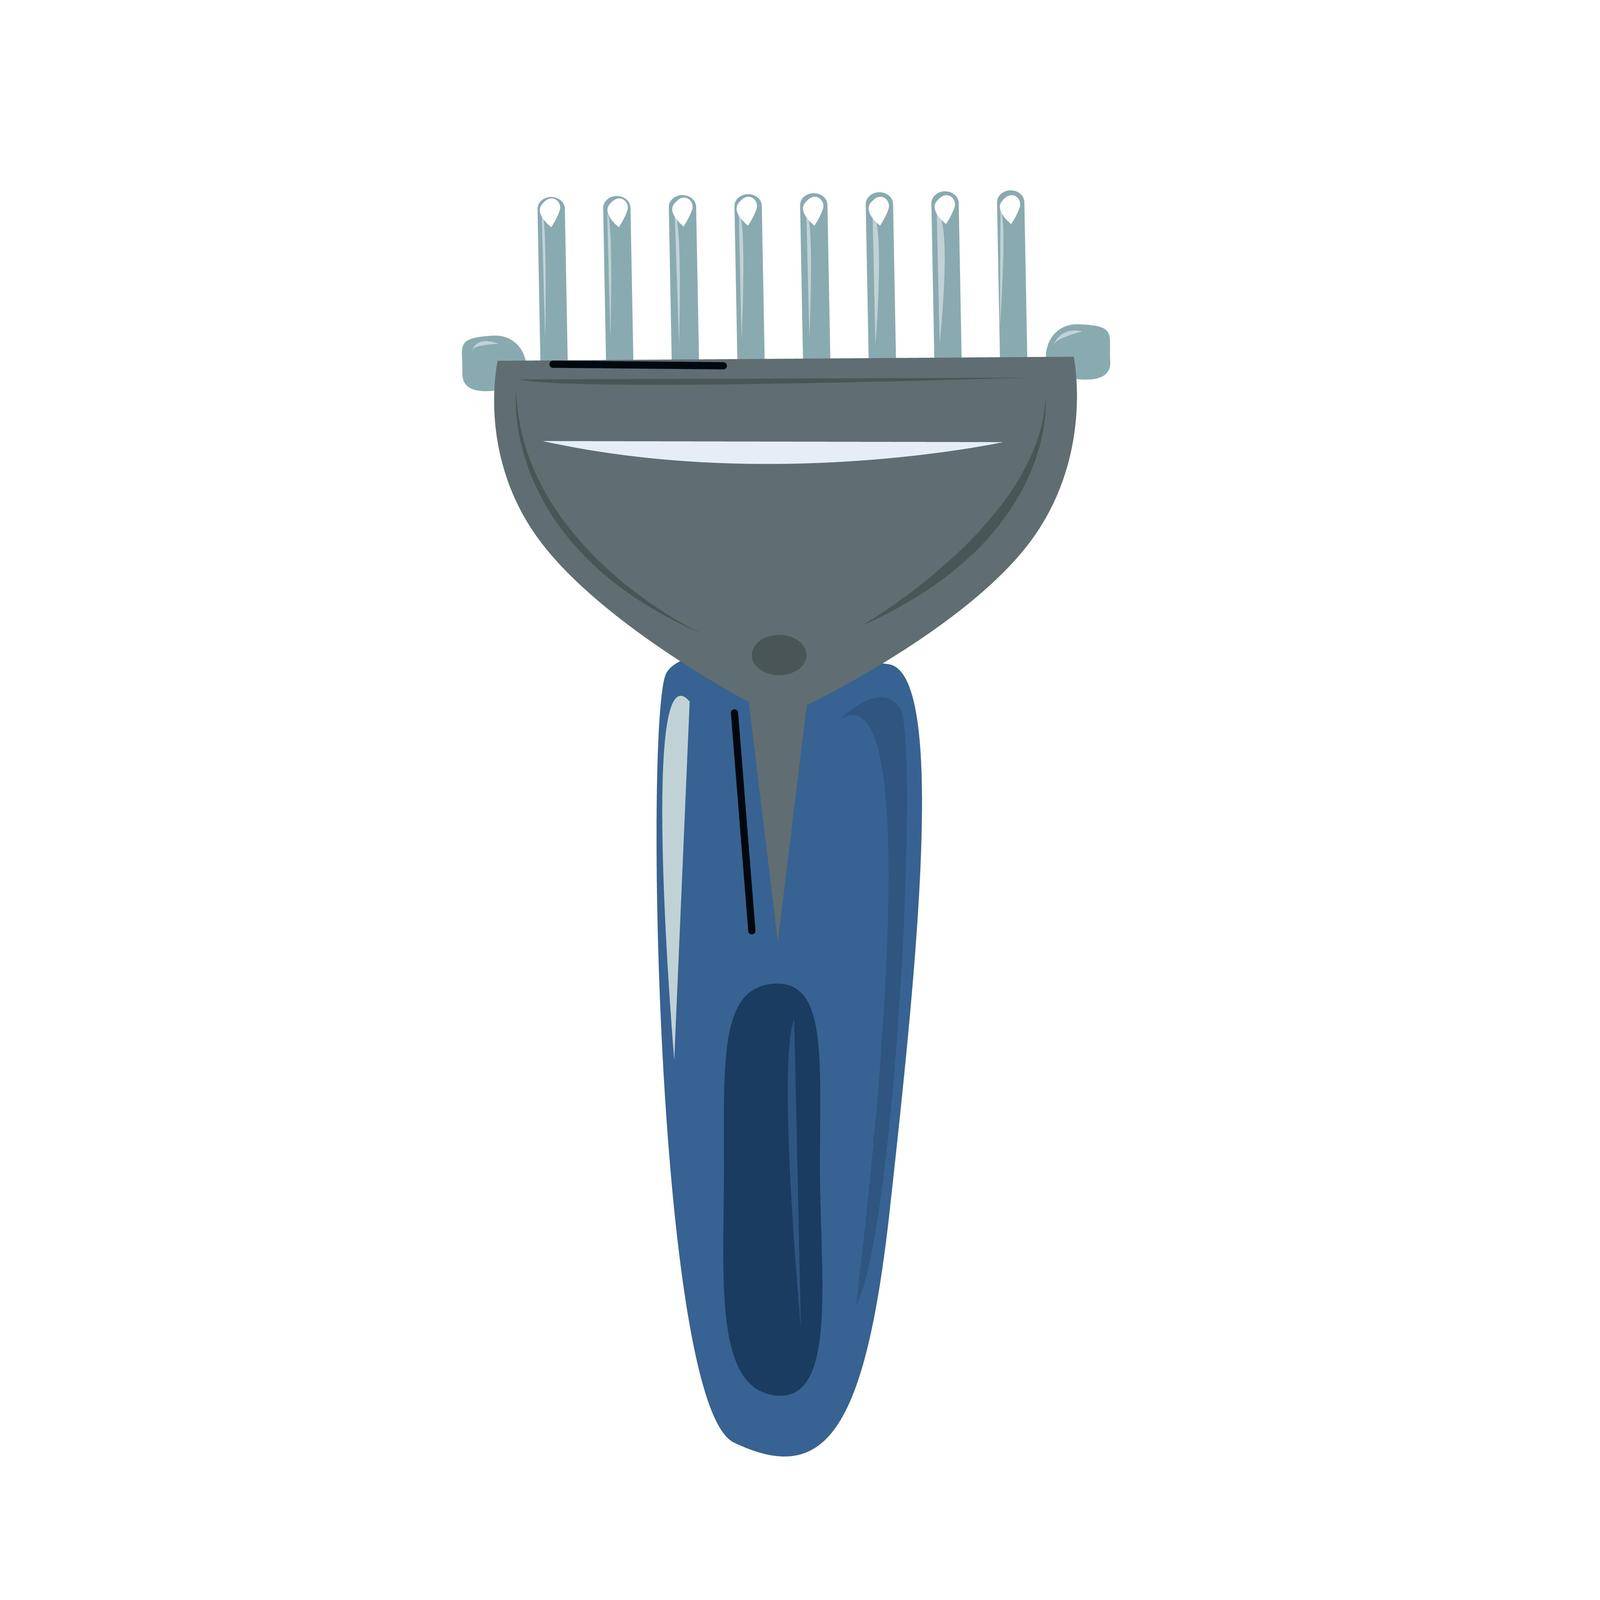 A comb for removing hair from pets or thinning it. by EvgeniyaEgorova